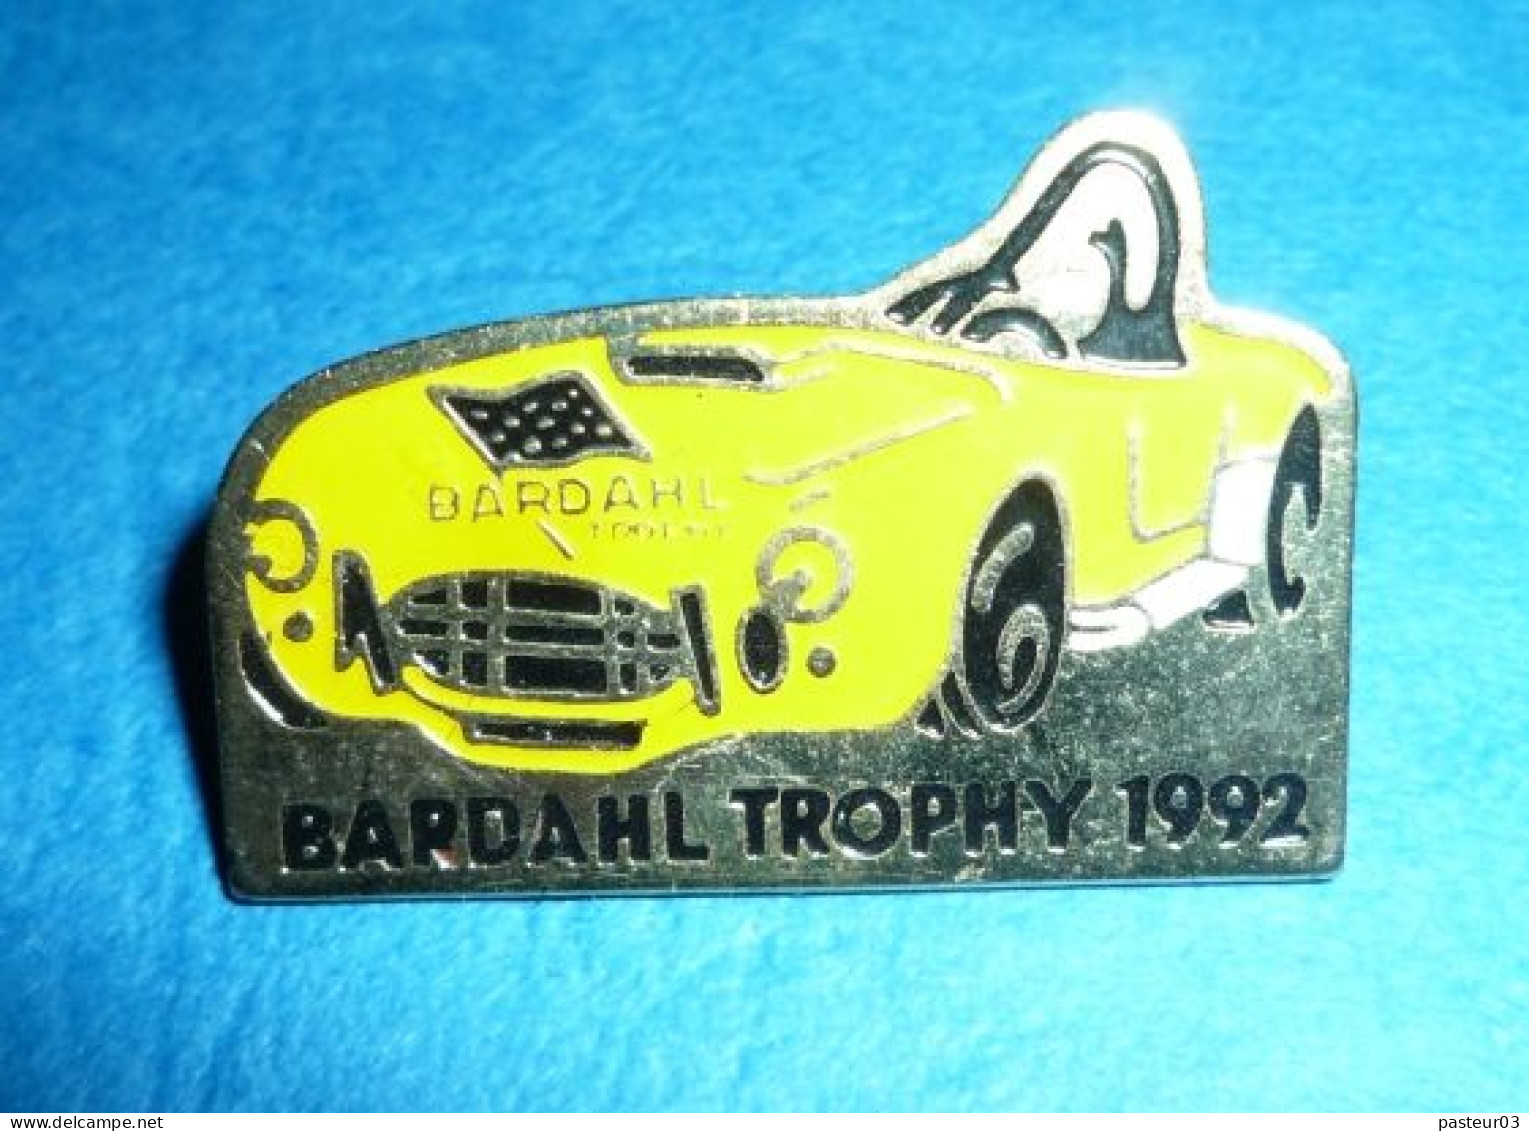 Bardhal Trophy 1992 Compétition Véhicules De Colletions Nevers Magny Cours (1ex.) - Kraftstoffe